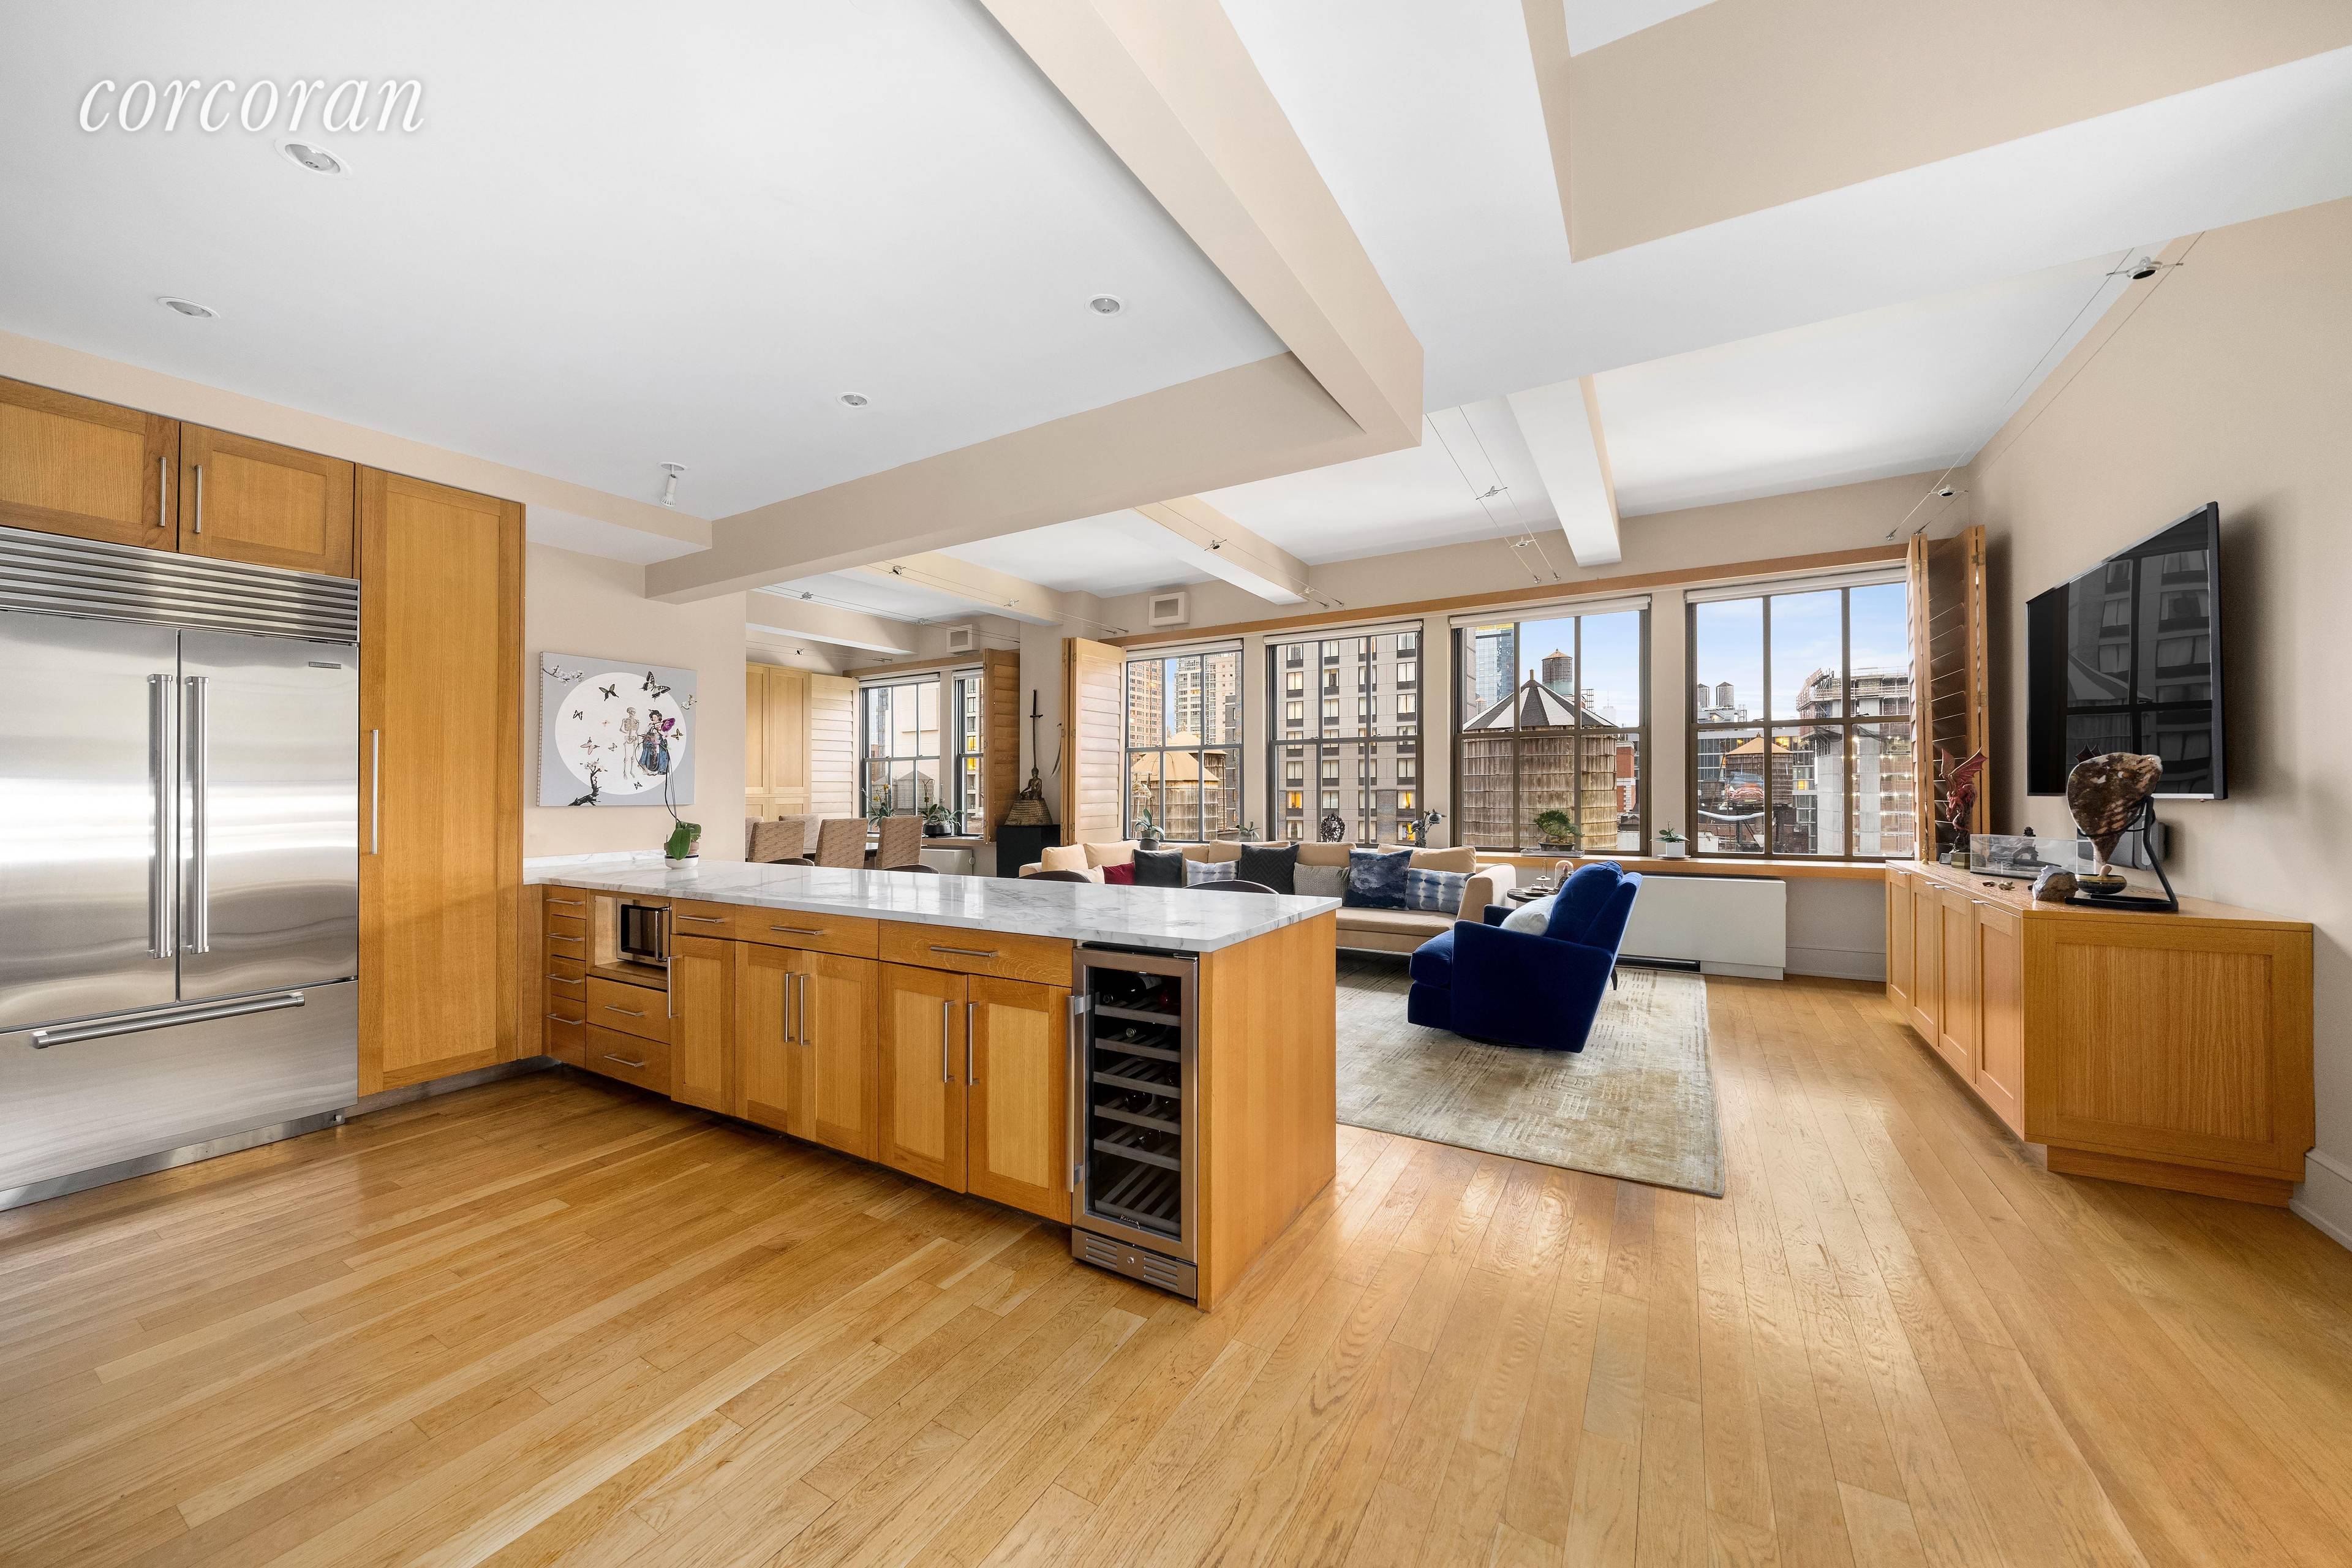 Spacious and luxurious Three 3 Bedroom, Three 3 Bathroom loft, with World Trade Center views and gorgeous natural light, all located in an architecturally significant building.